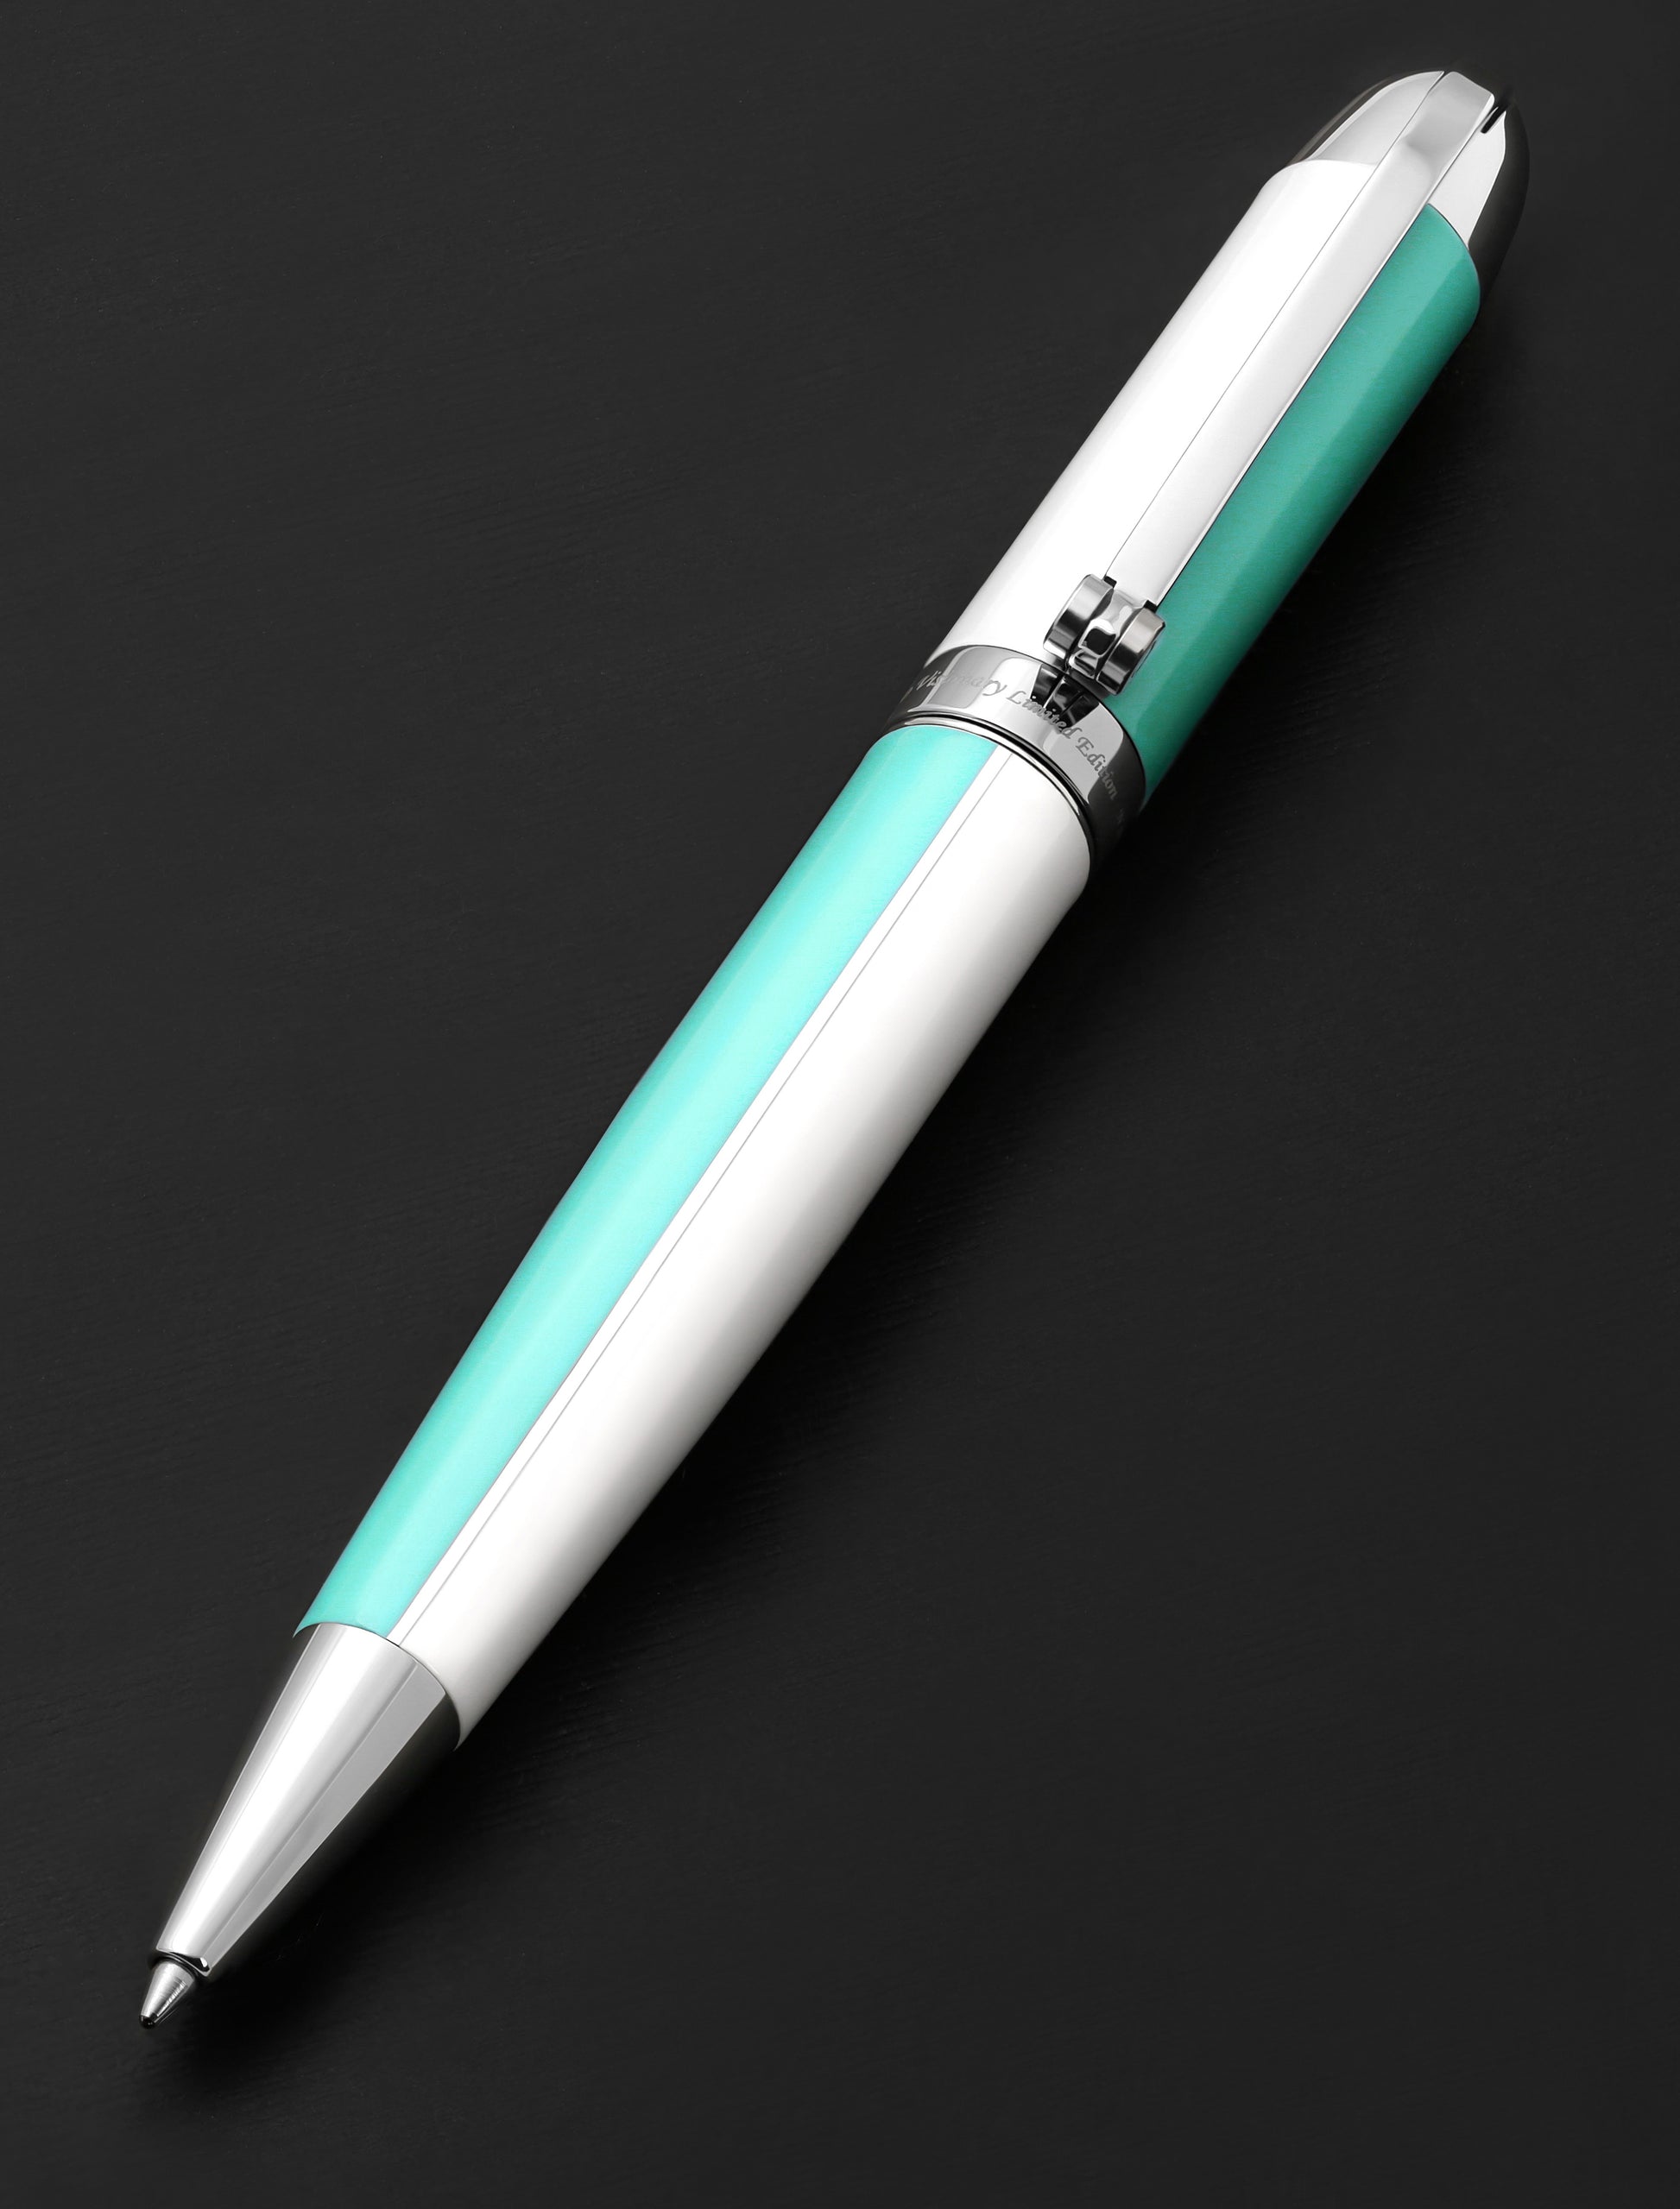 The beauty of pen shell – Turquoise Skies